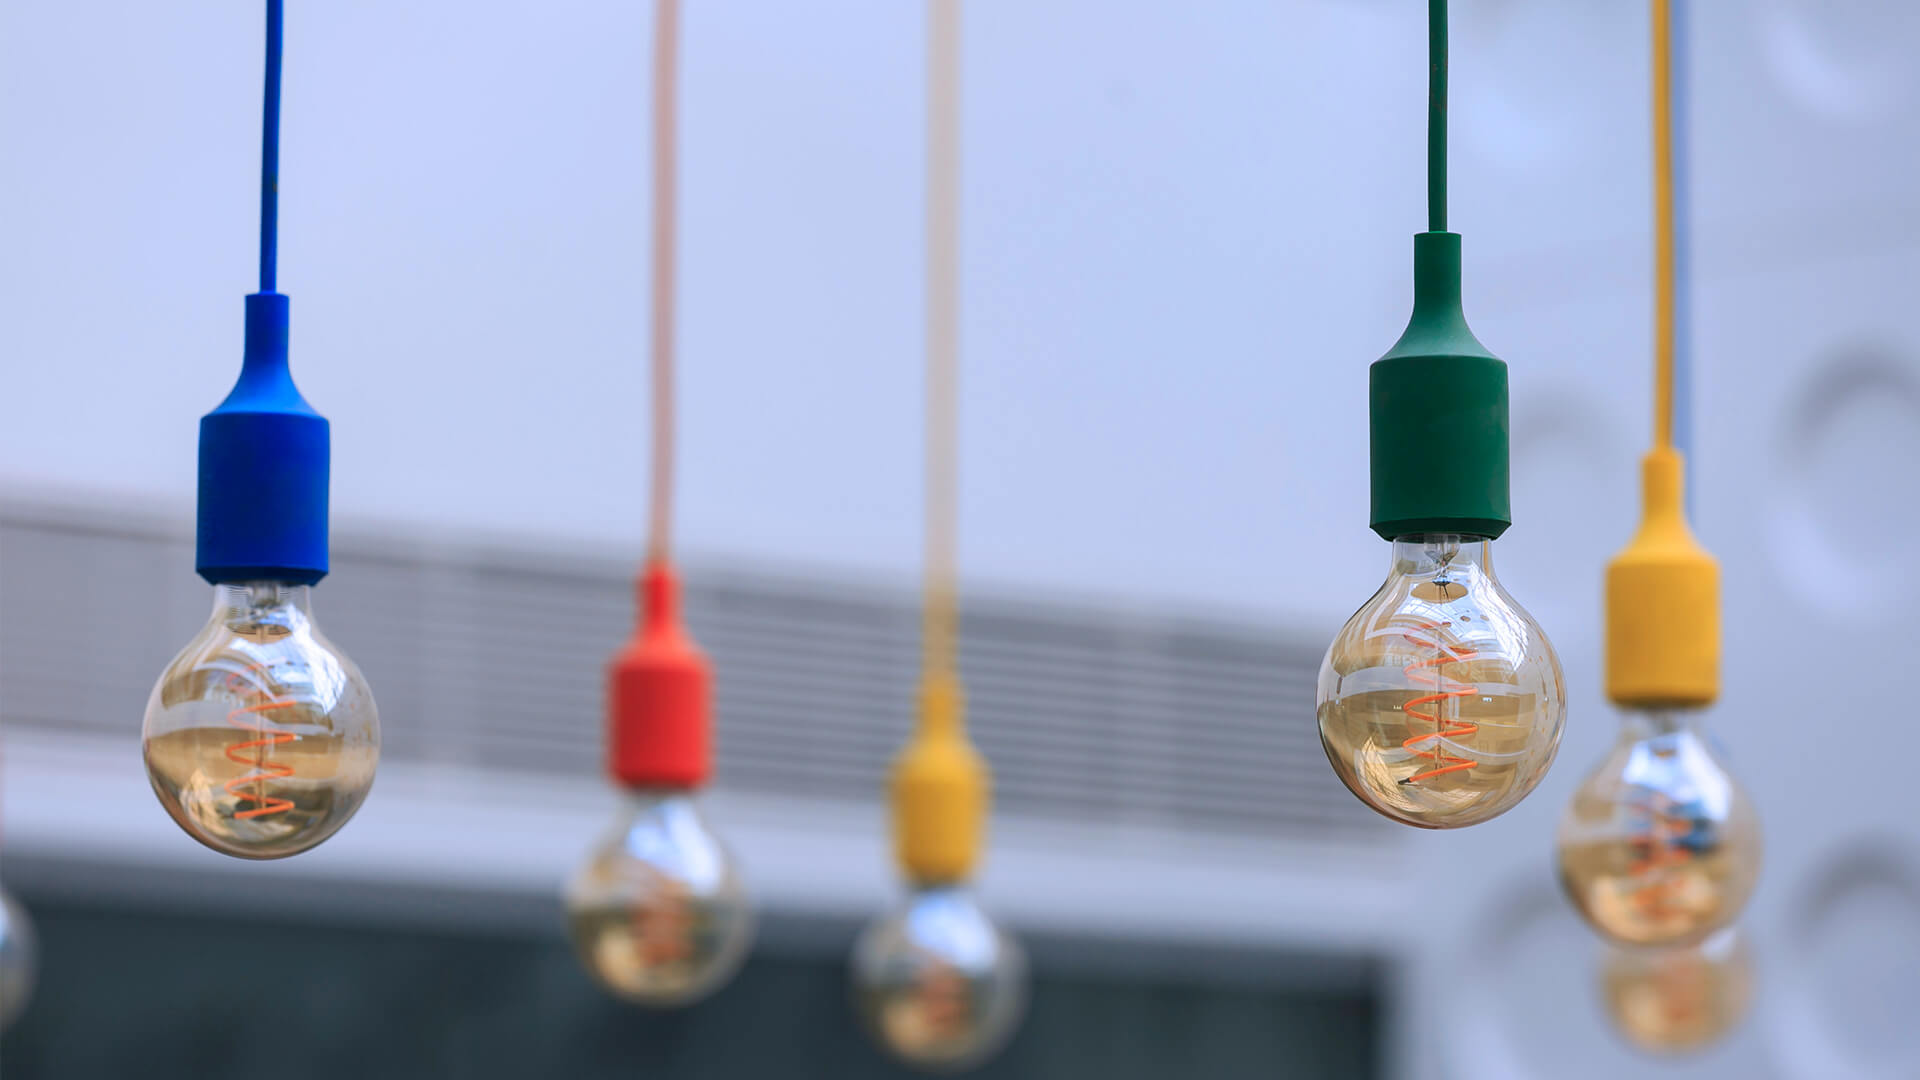 A detail shot of multicolored, hanging lightbulbs in the Grainstore building